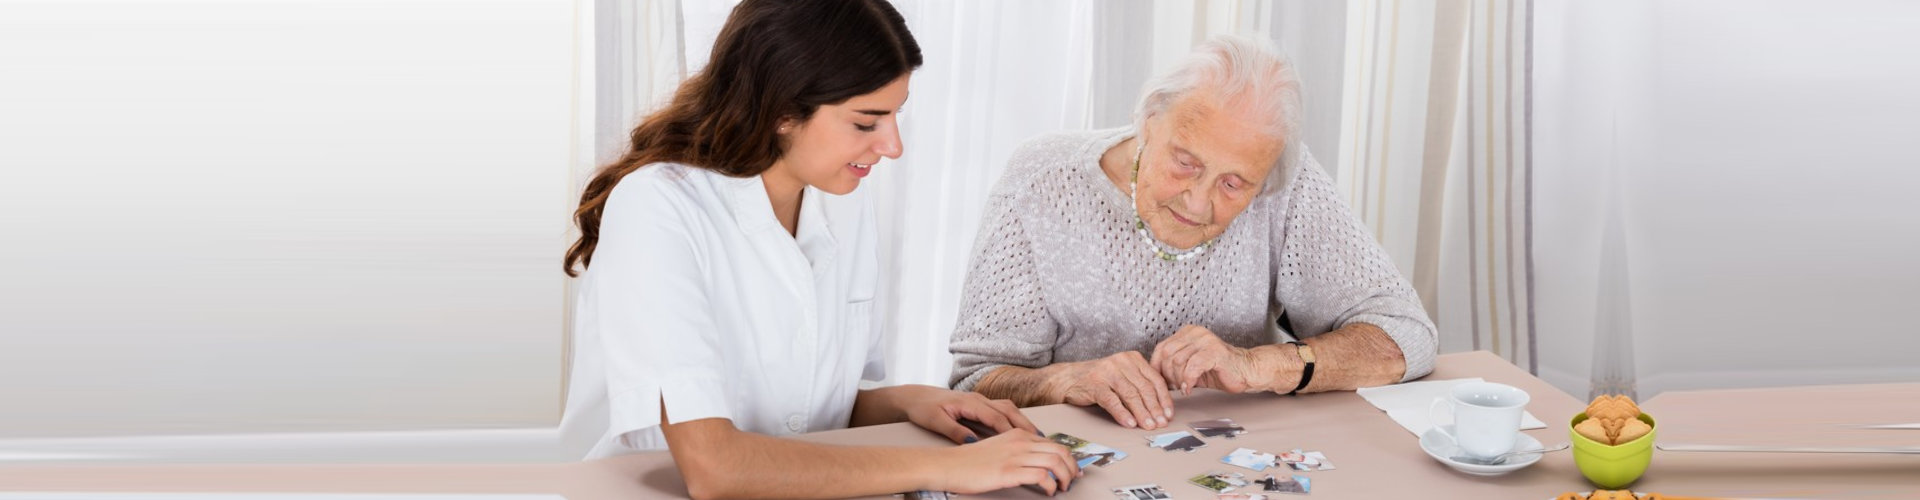 "senior woman playing jigsaw puzzles on the table with her caregiver